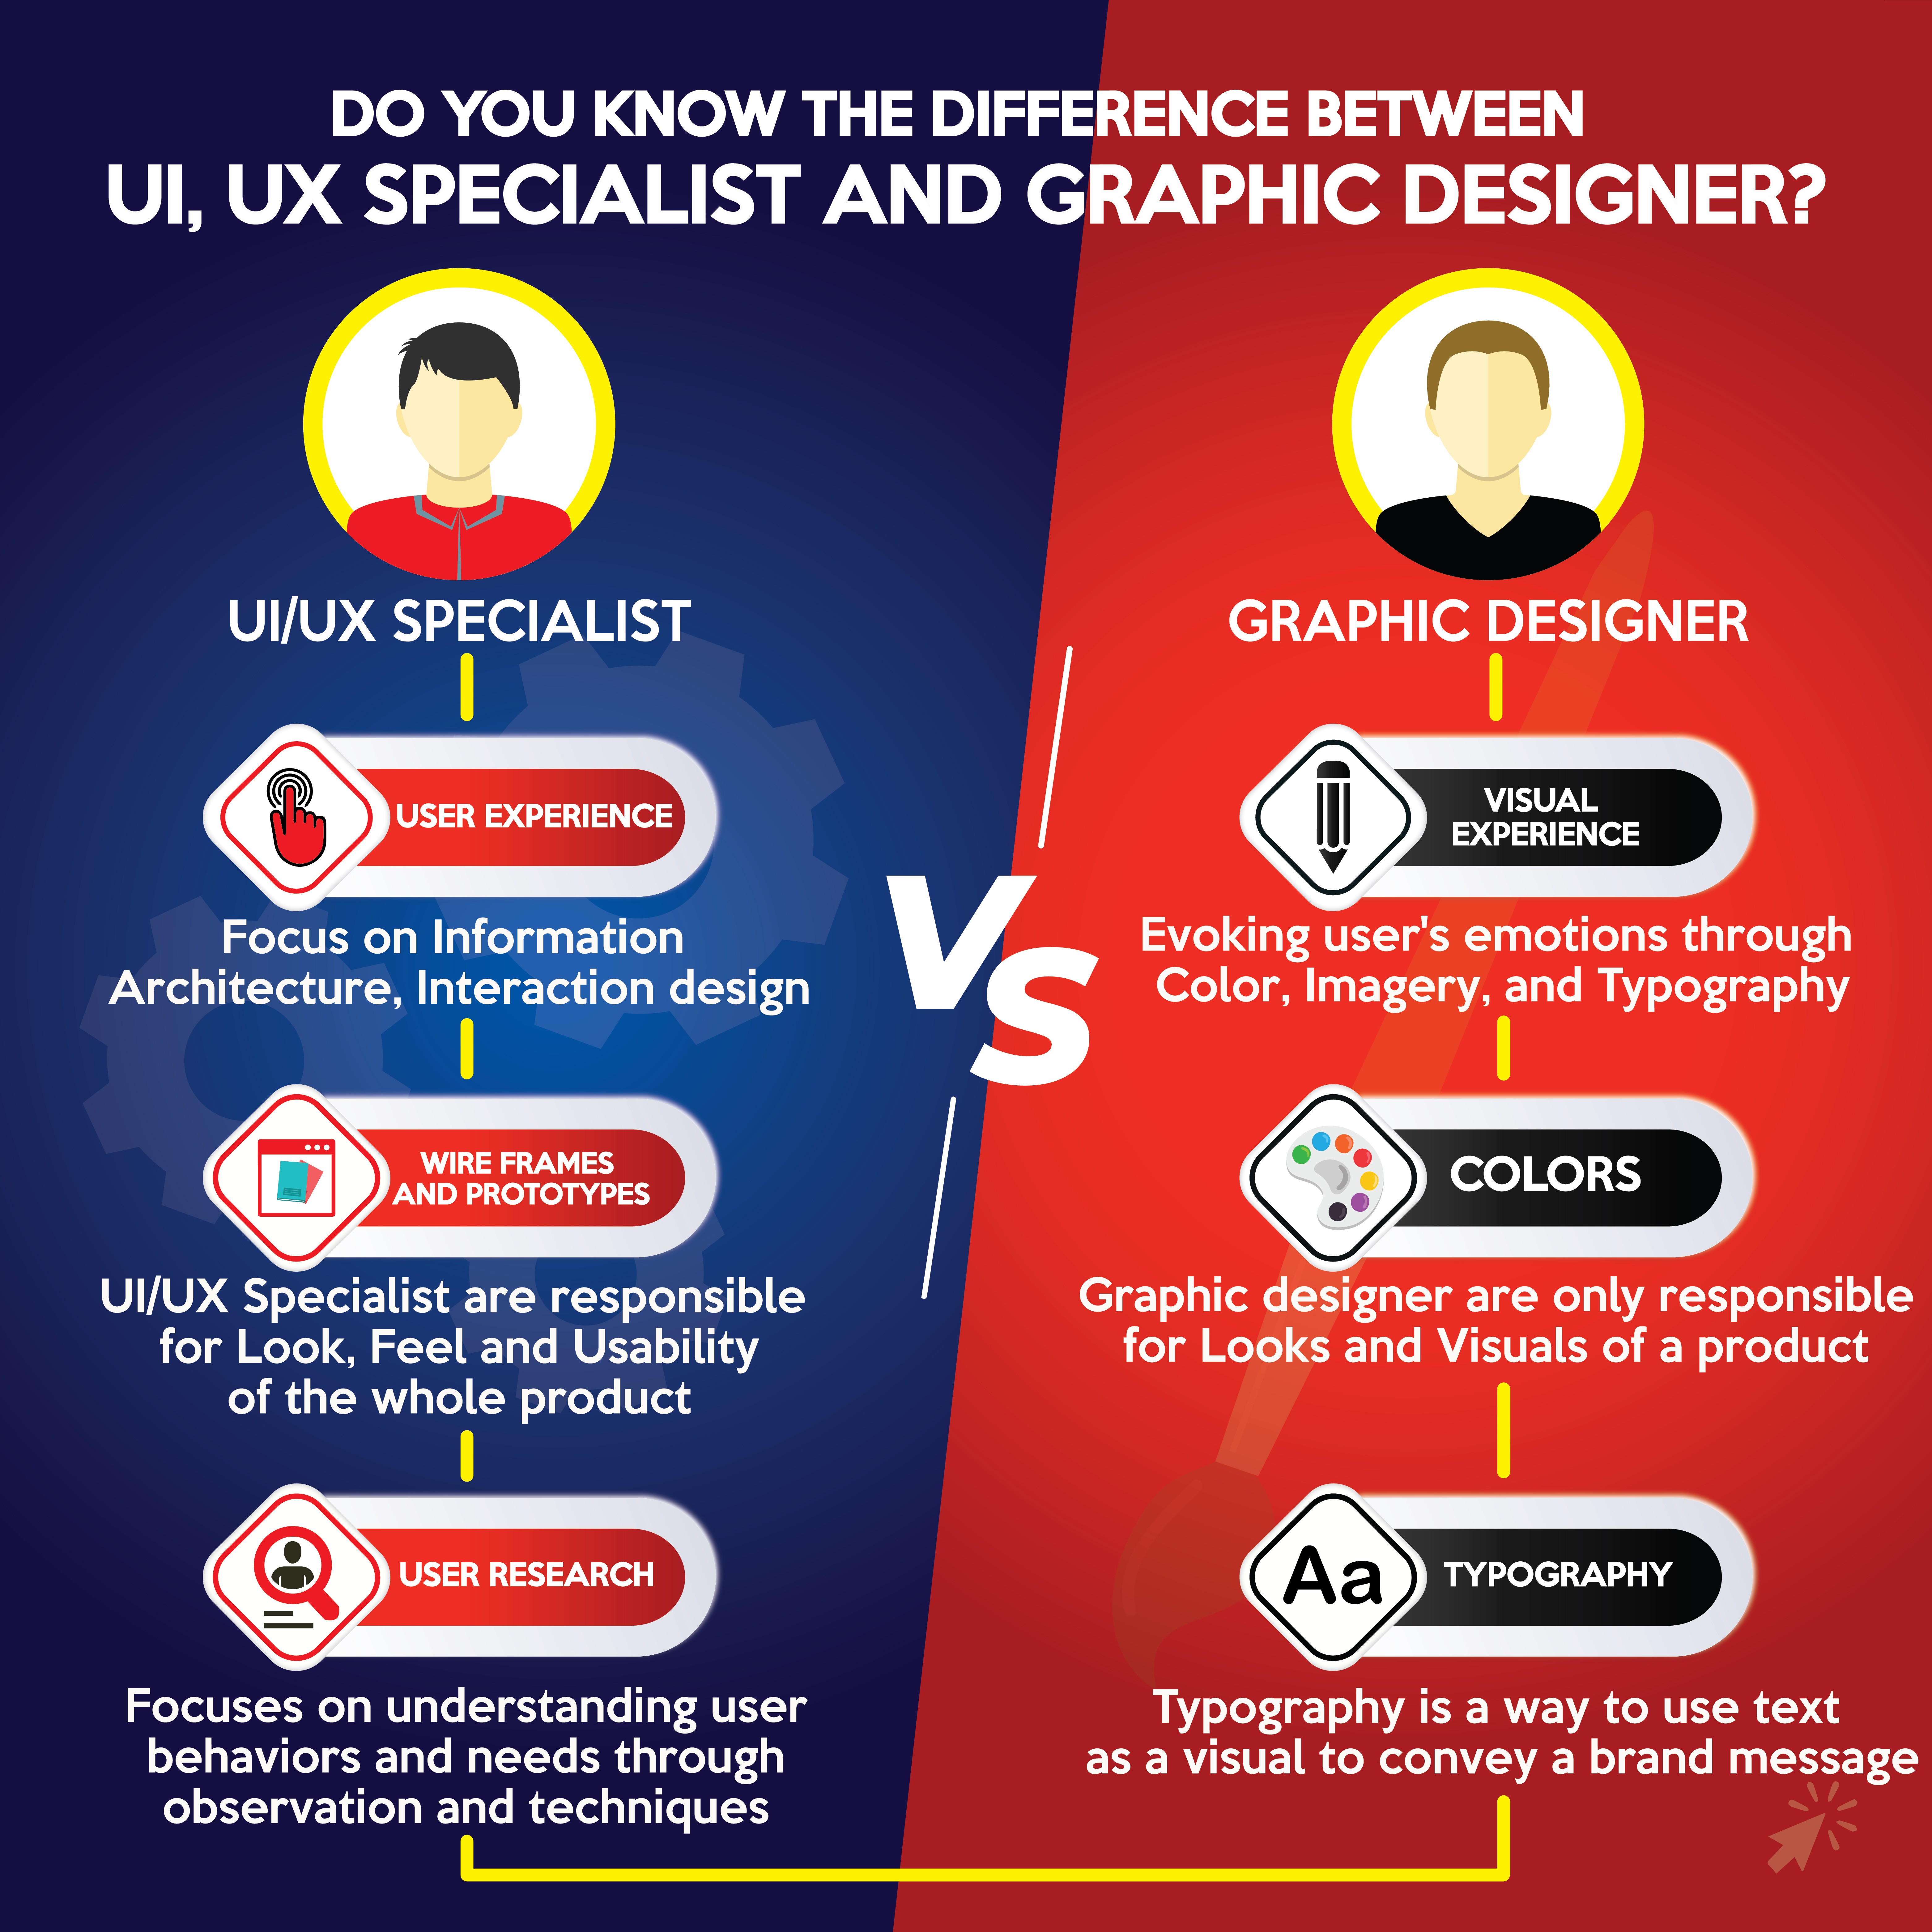 Difference between UI, UX Specialist and Graphic